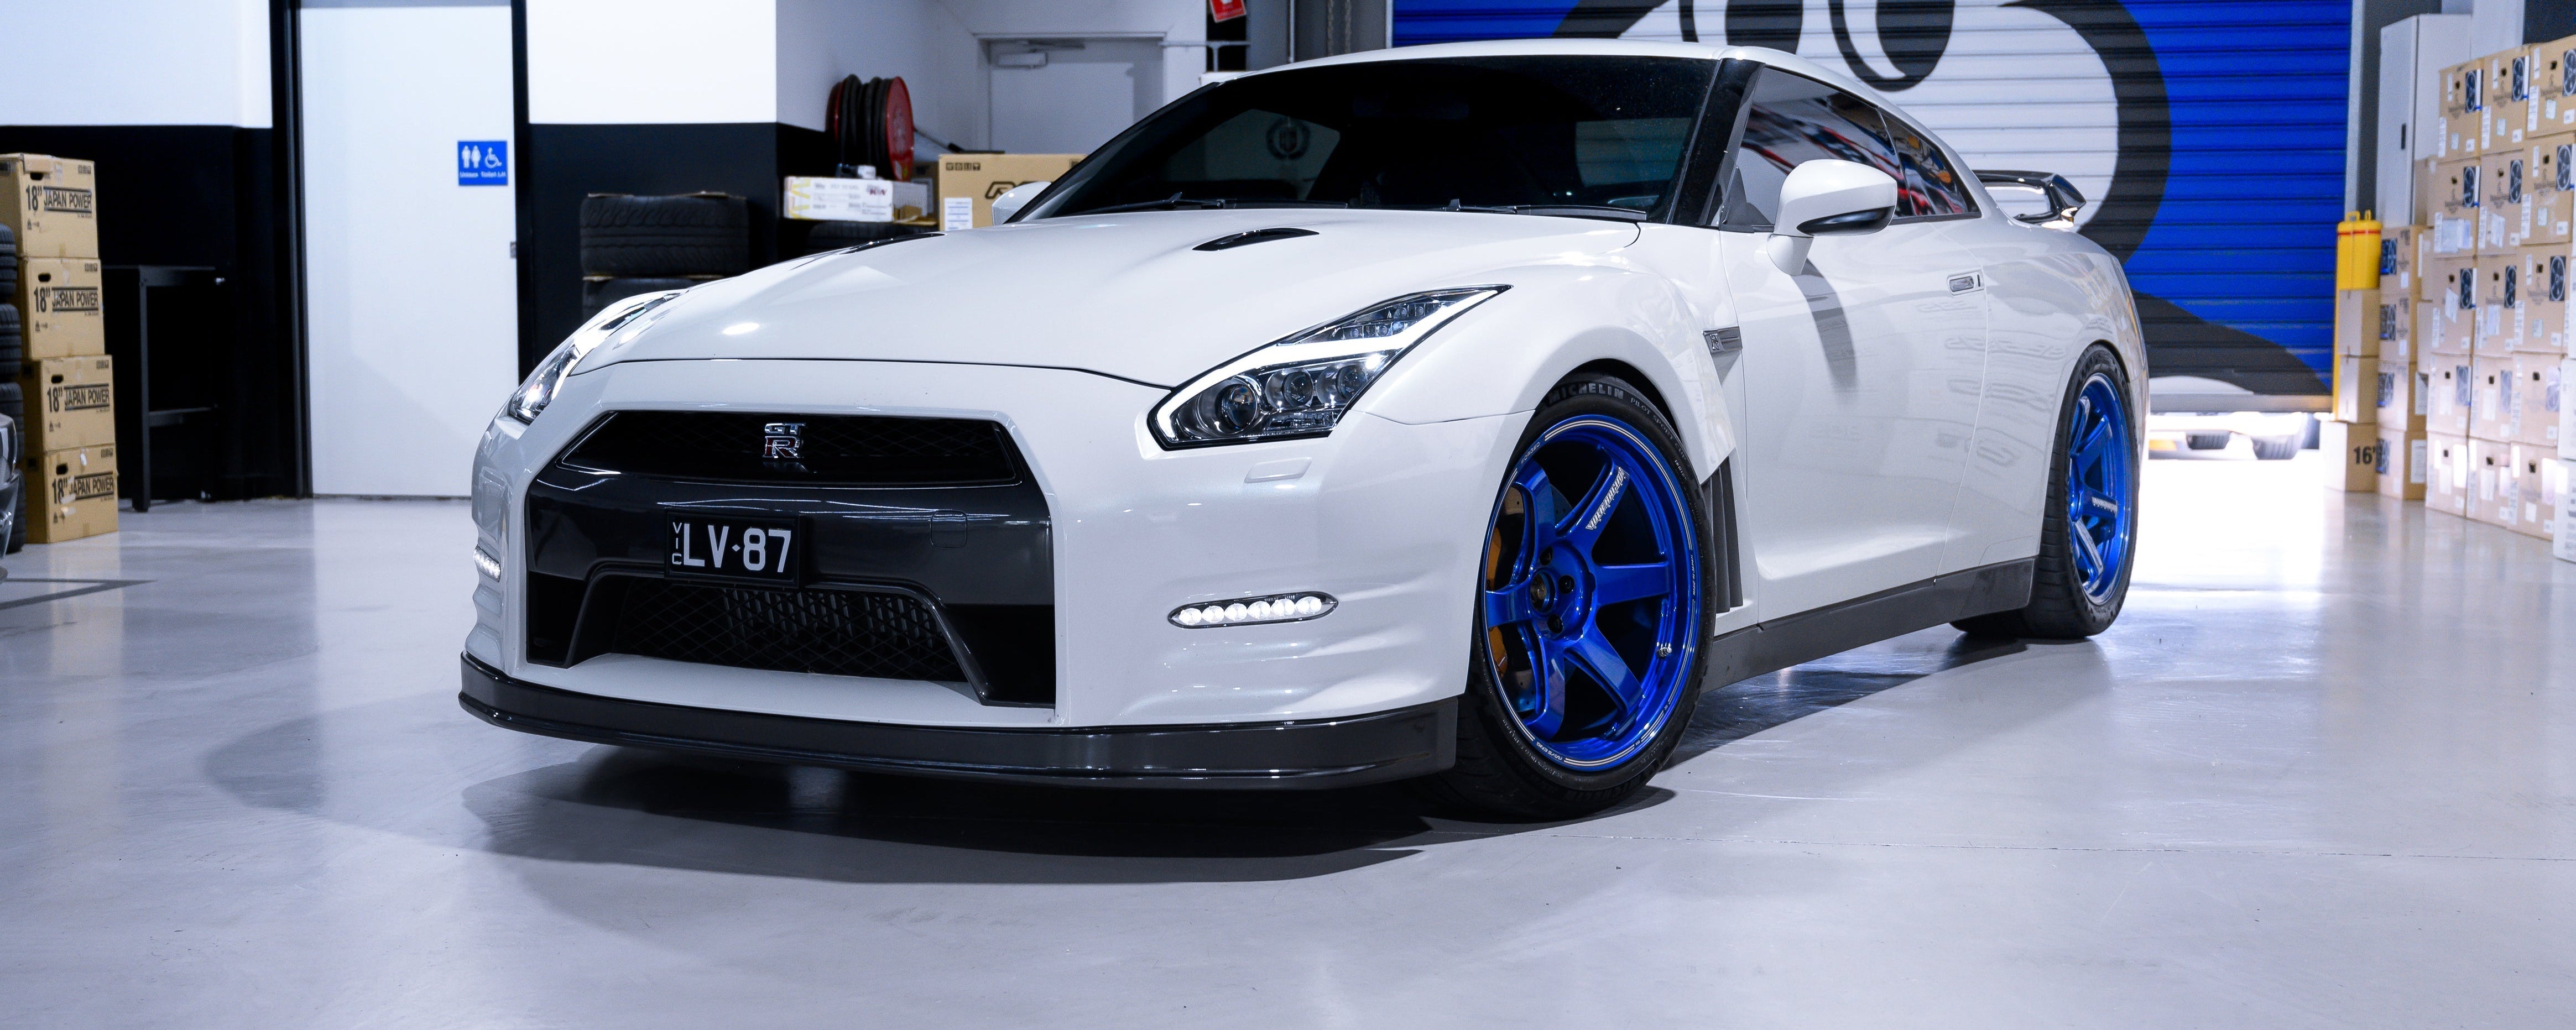 Volk Racing TE37 Ultra Track Edition II R35 GT-R - Premium Wheels from Volk Racing - From just $6890.0! Shop now at MK MOTORSPORTS